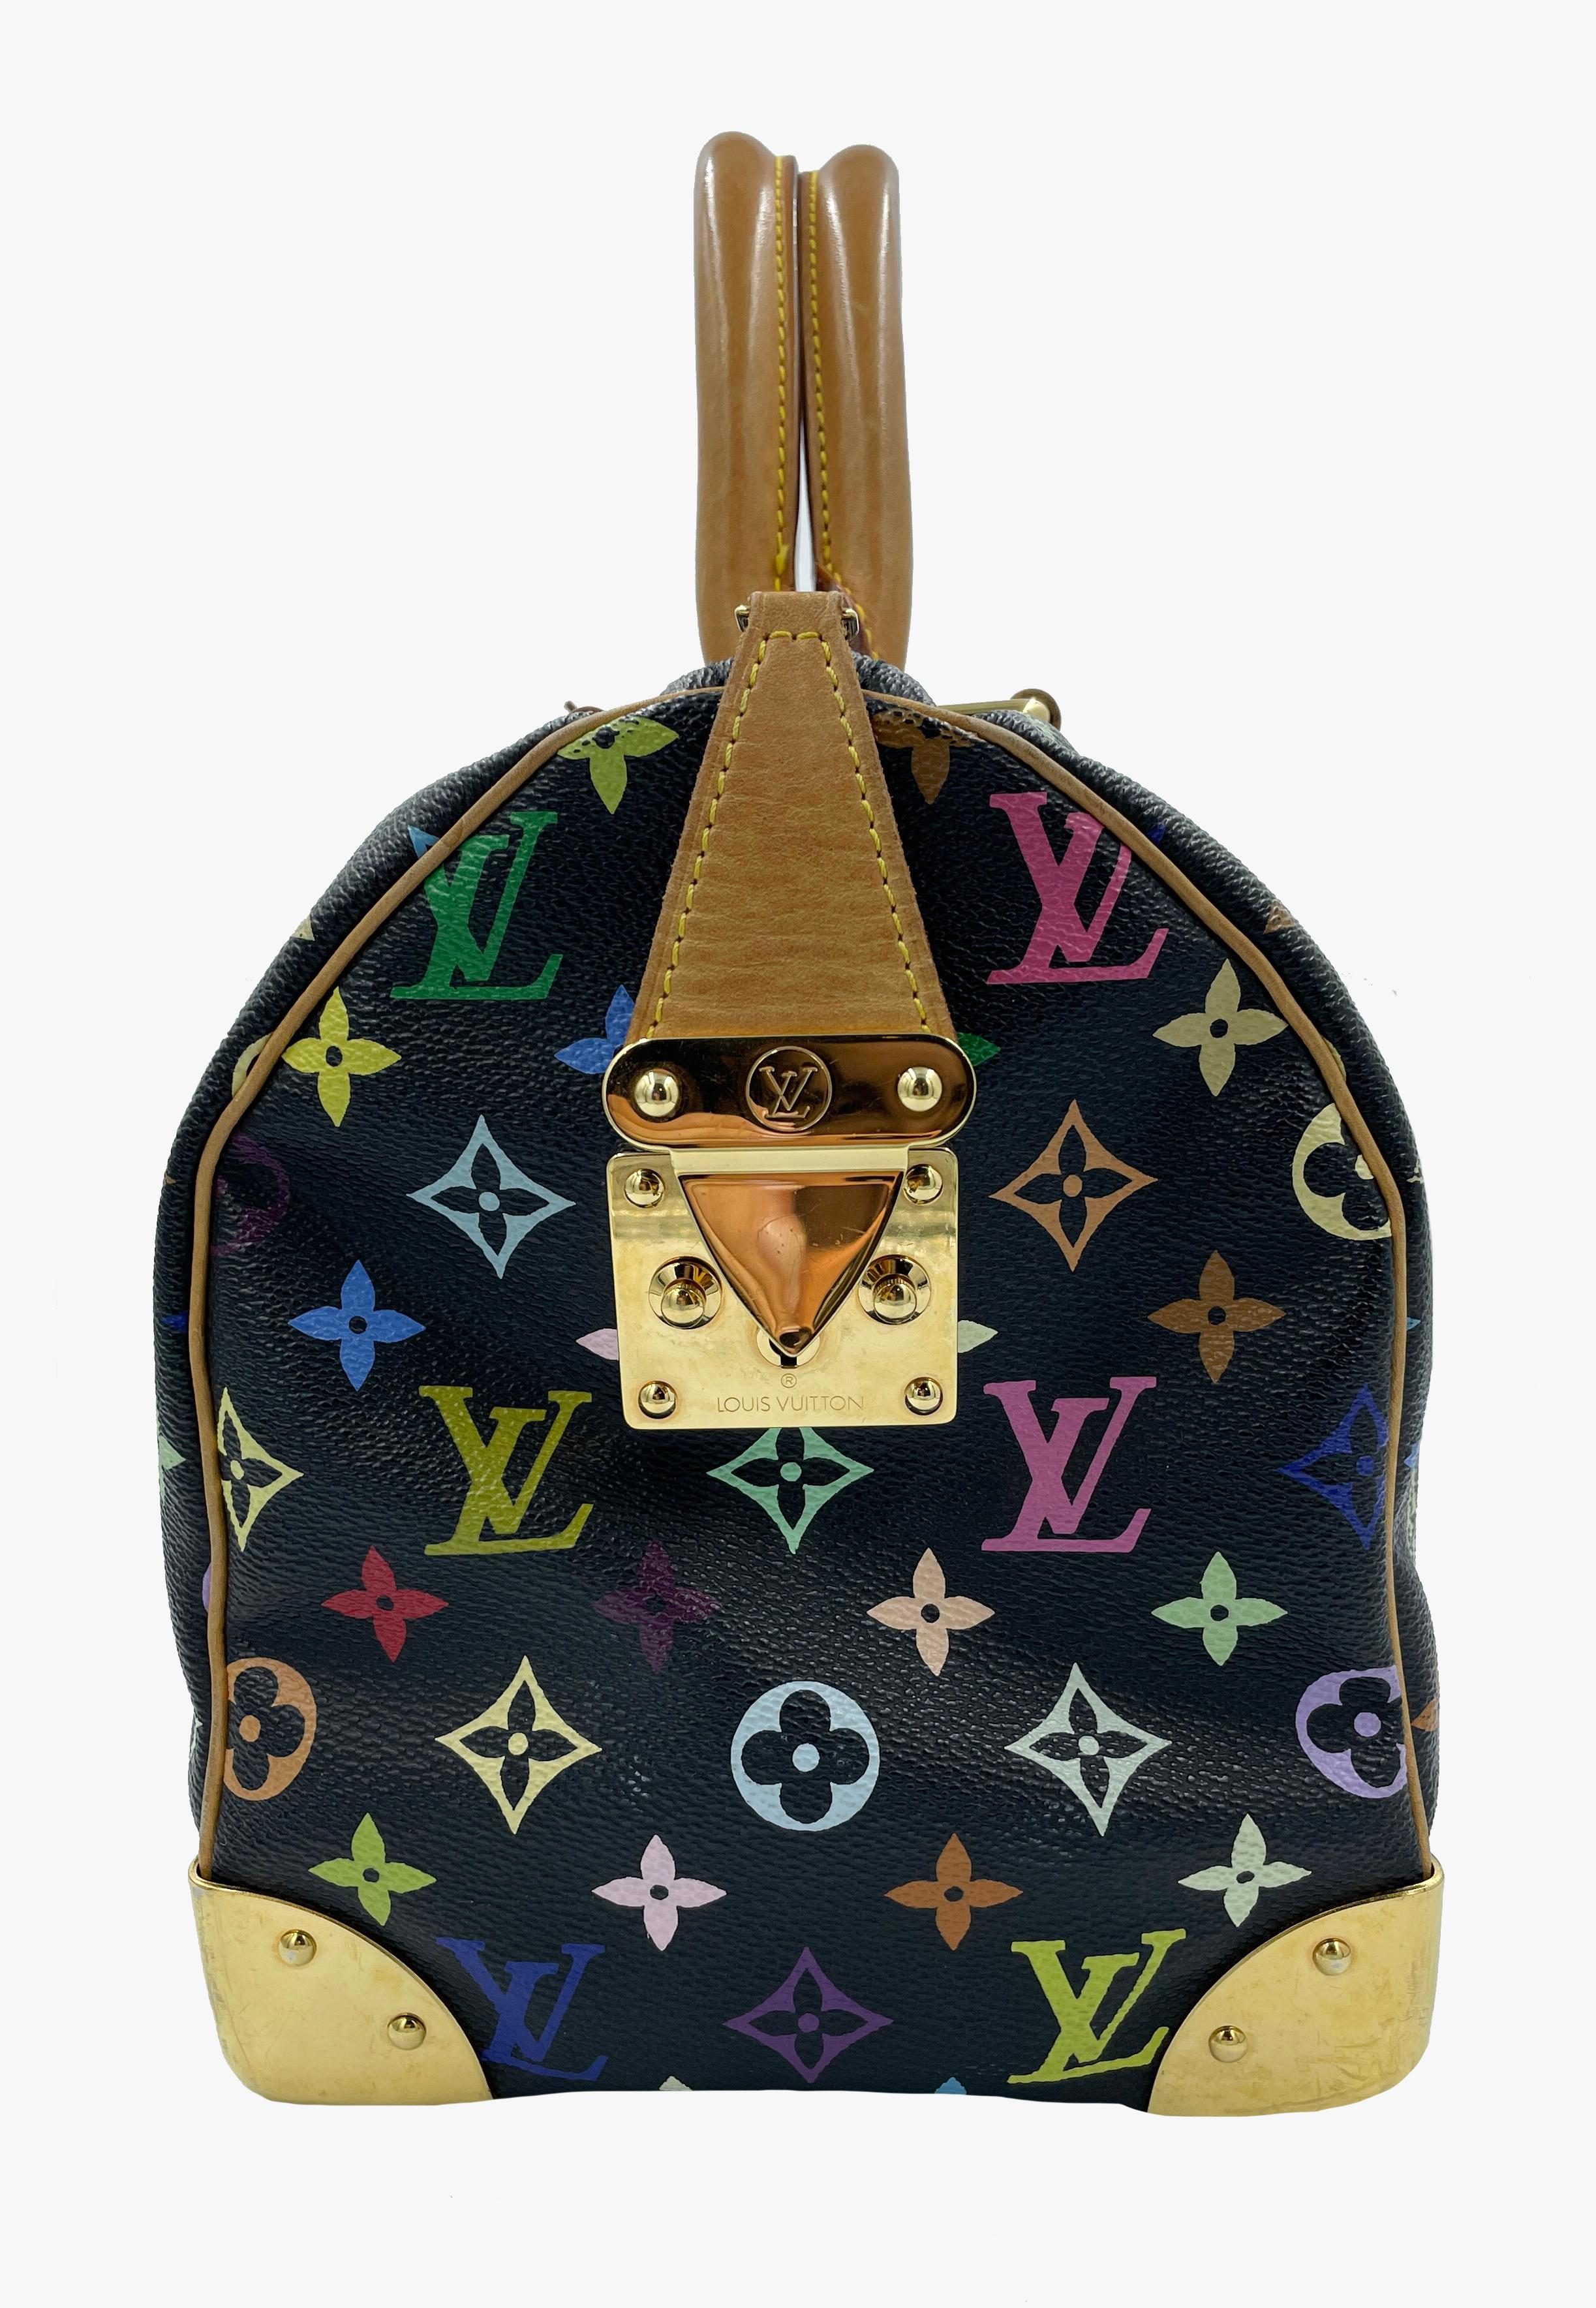 Louis Vuitton Speedy 30 Murakami Multiple colors Monogram Bag, 2003 In Good Condition For Sale In New York, NY